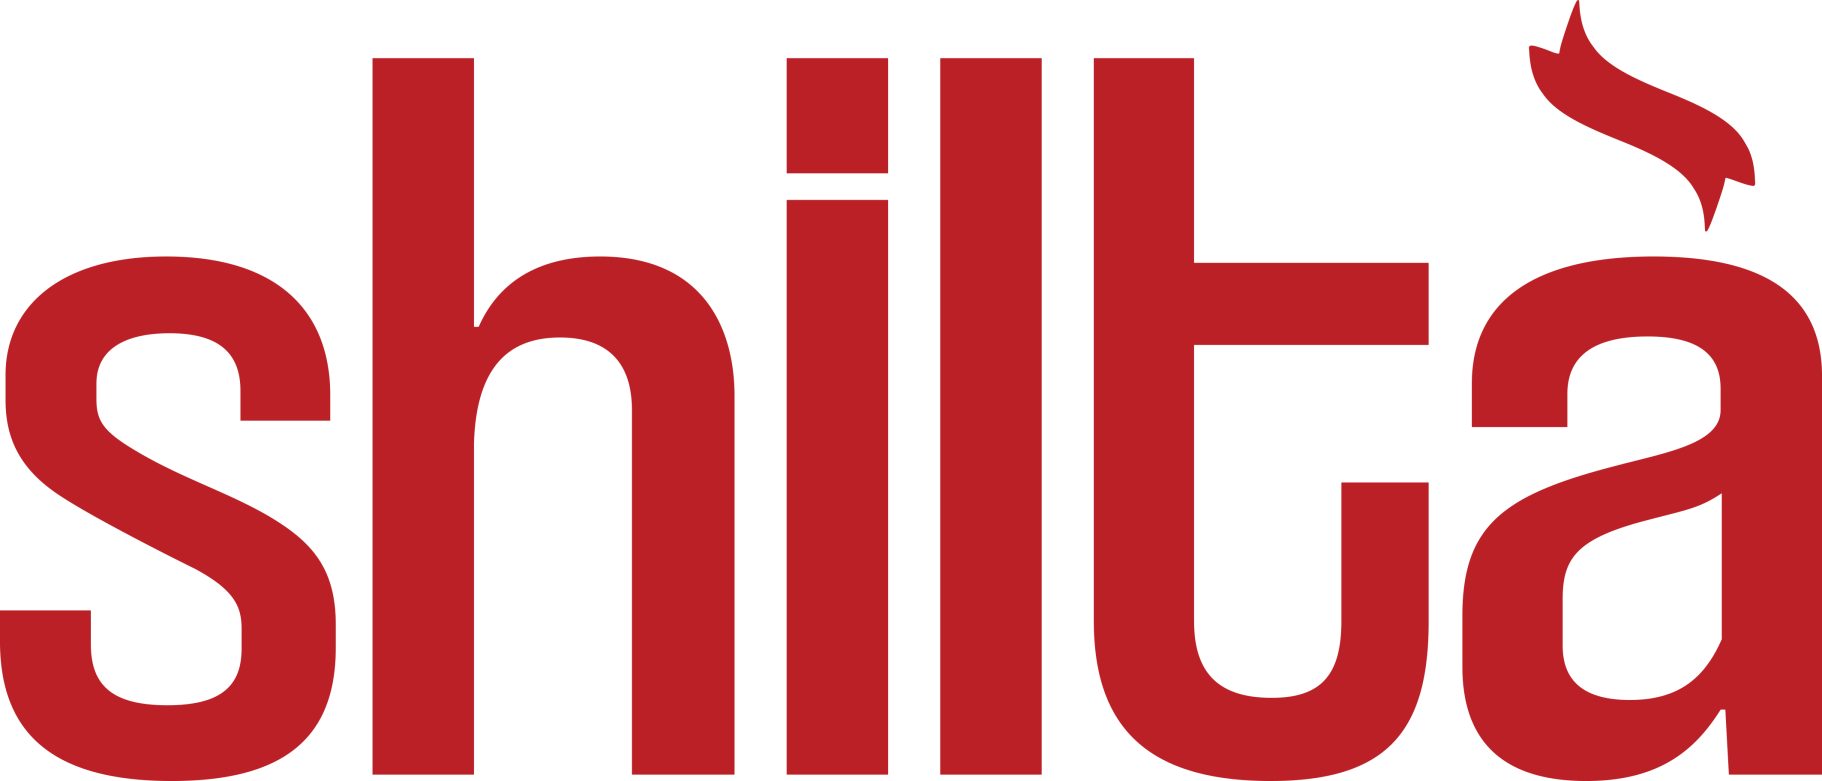 red logo spelling word Shilta, ribbon on top of the last letter